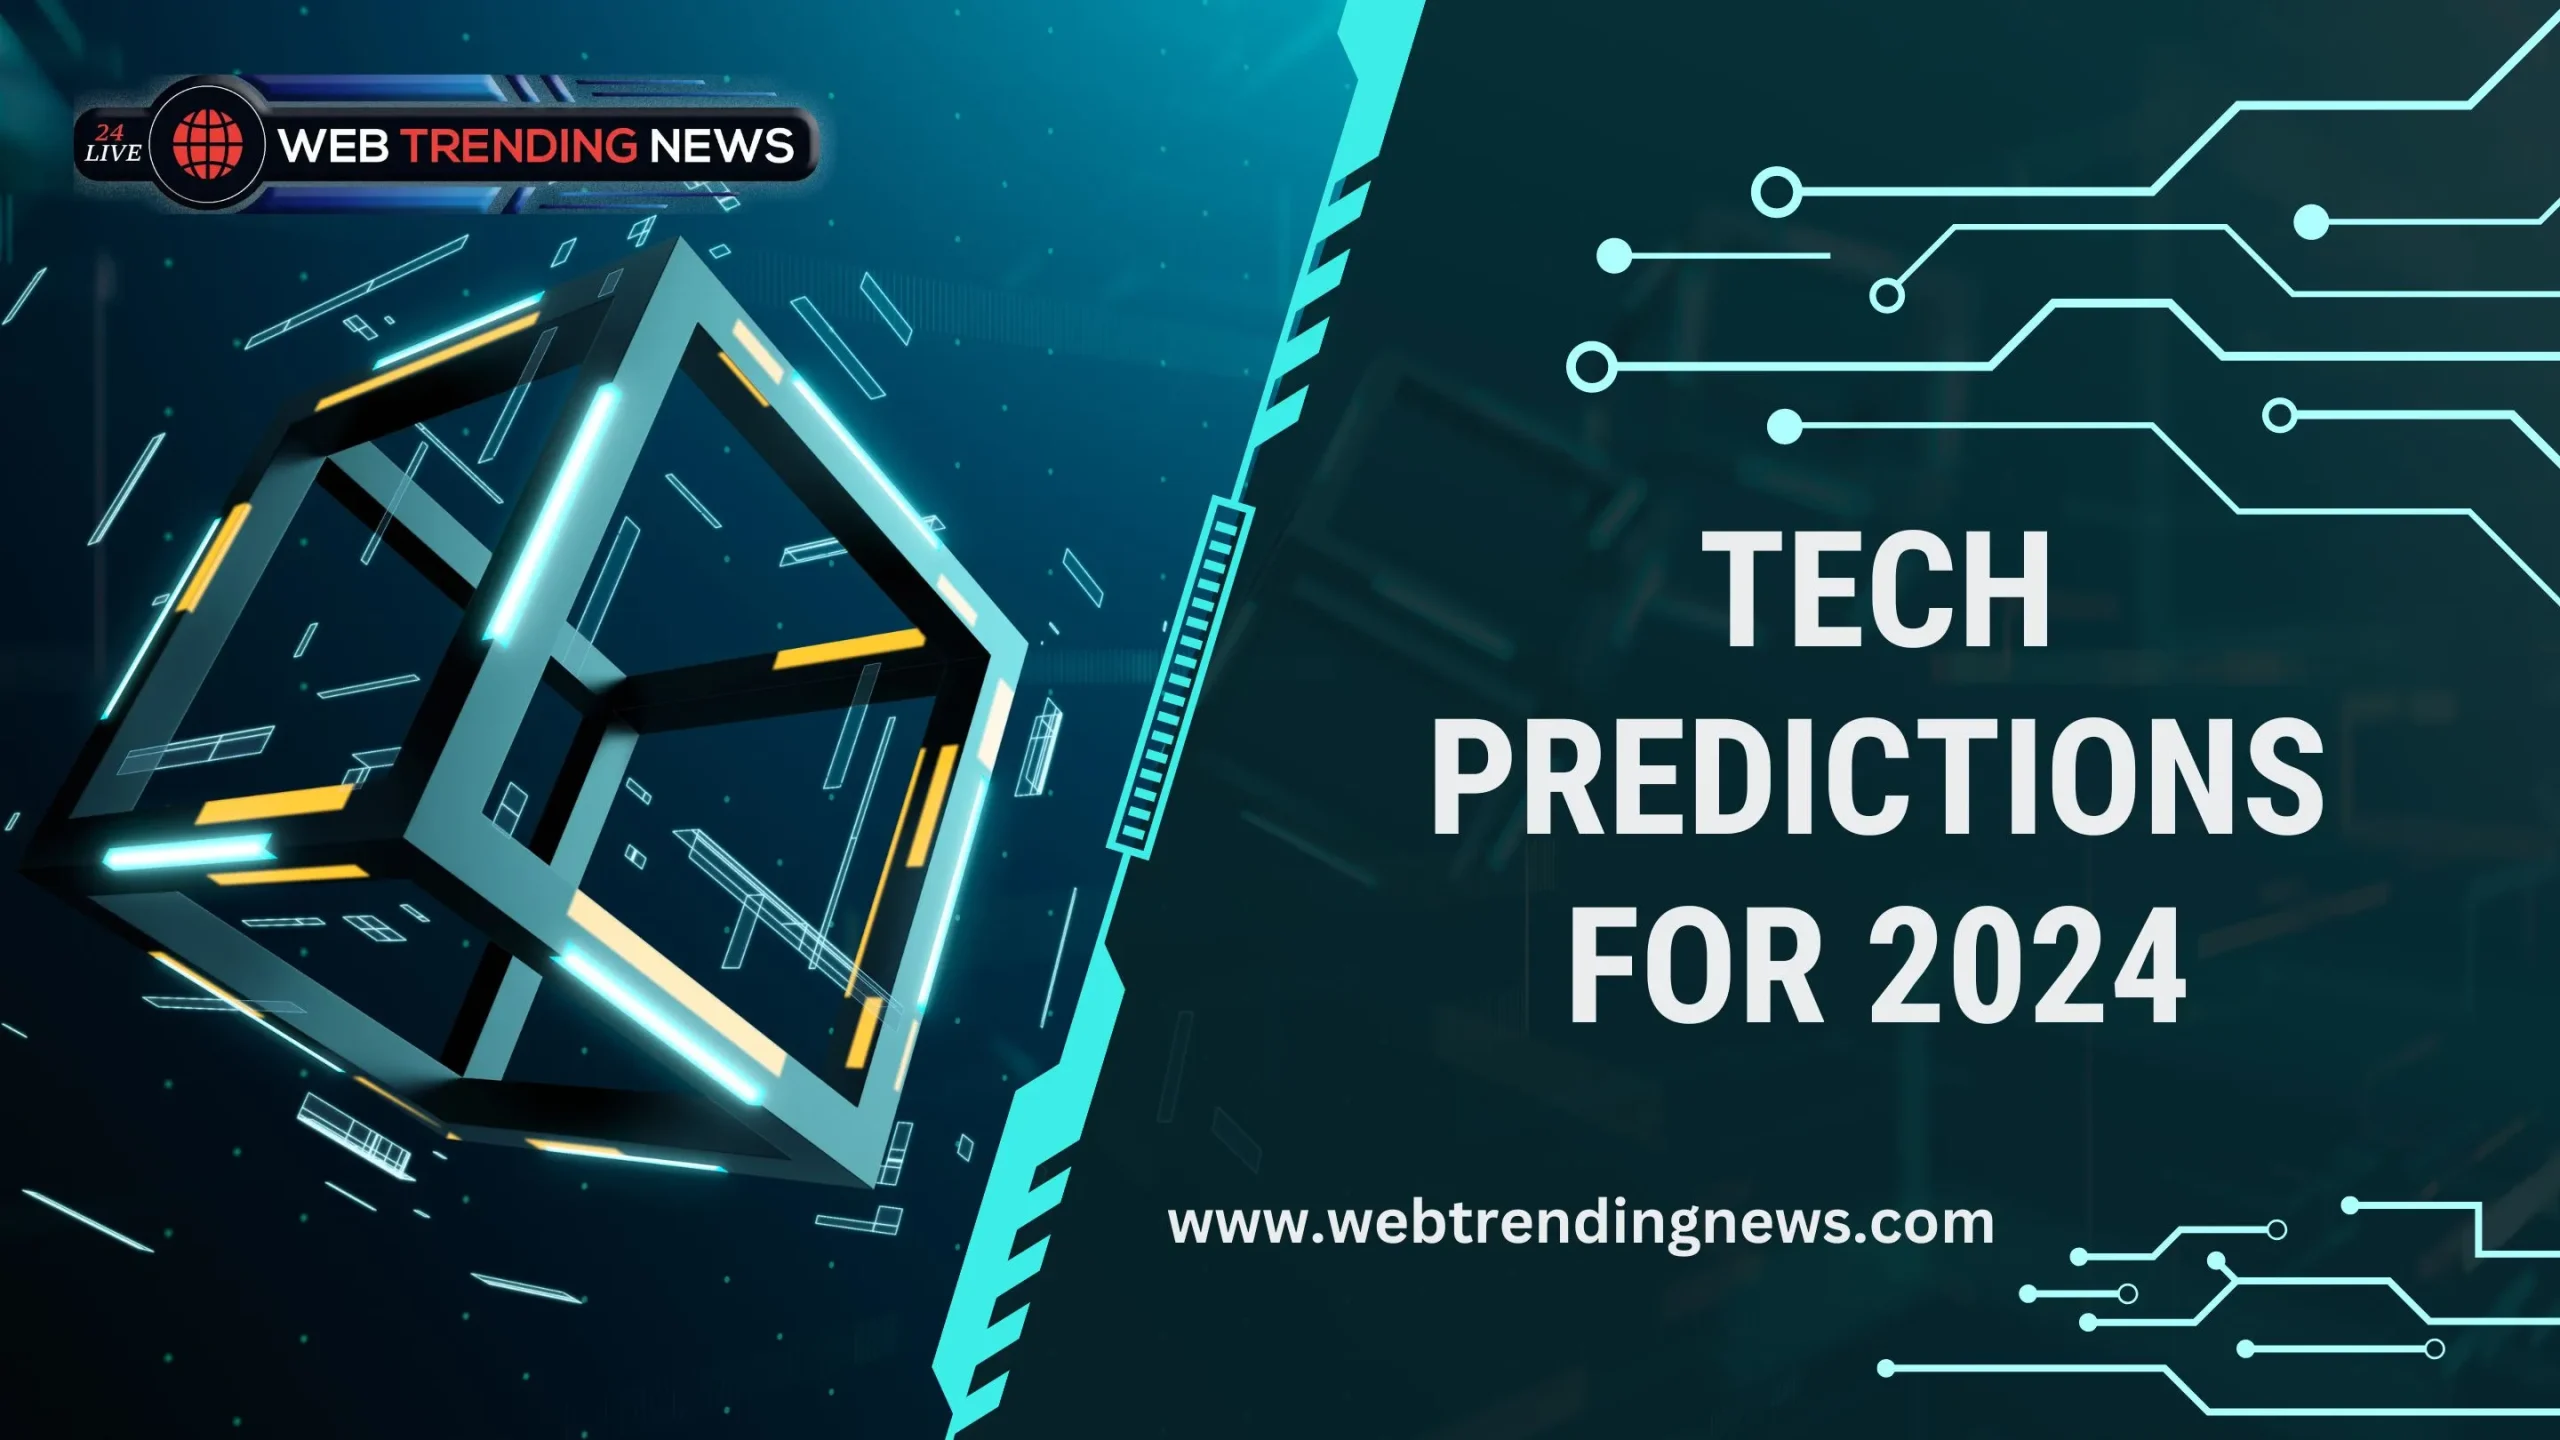 Tech Predictions for 2024